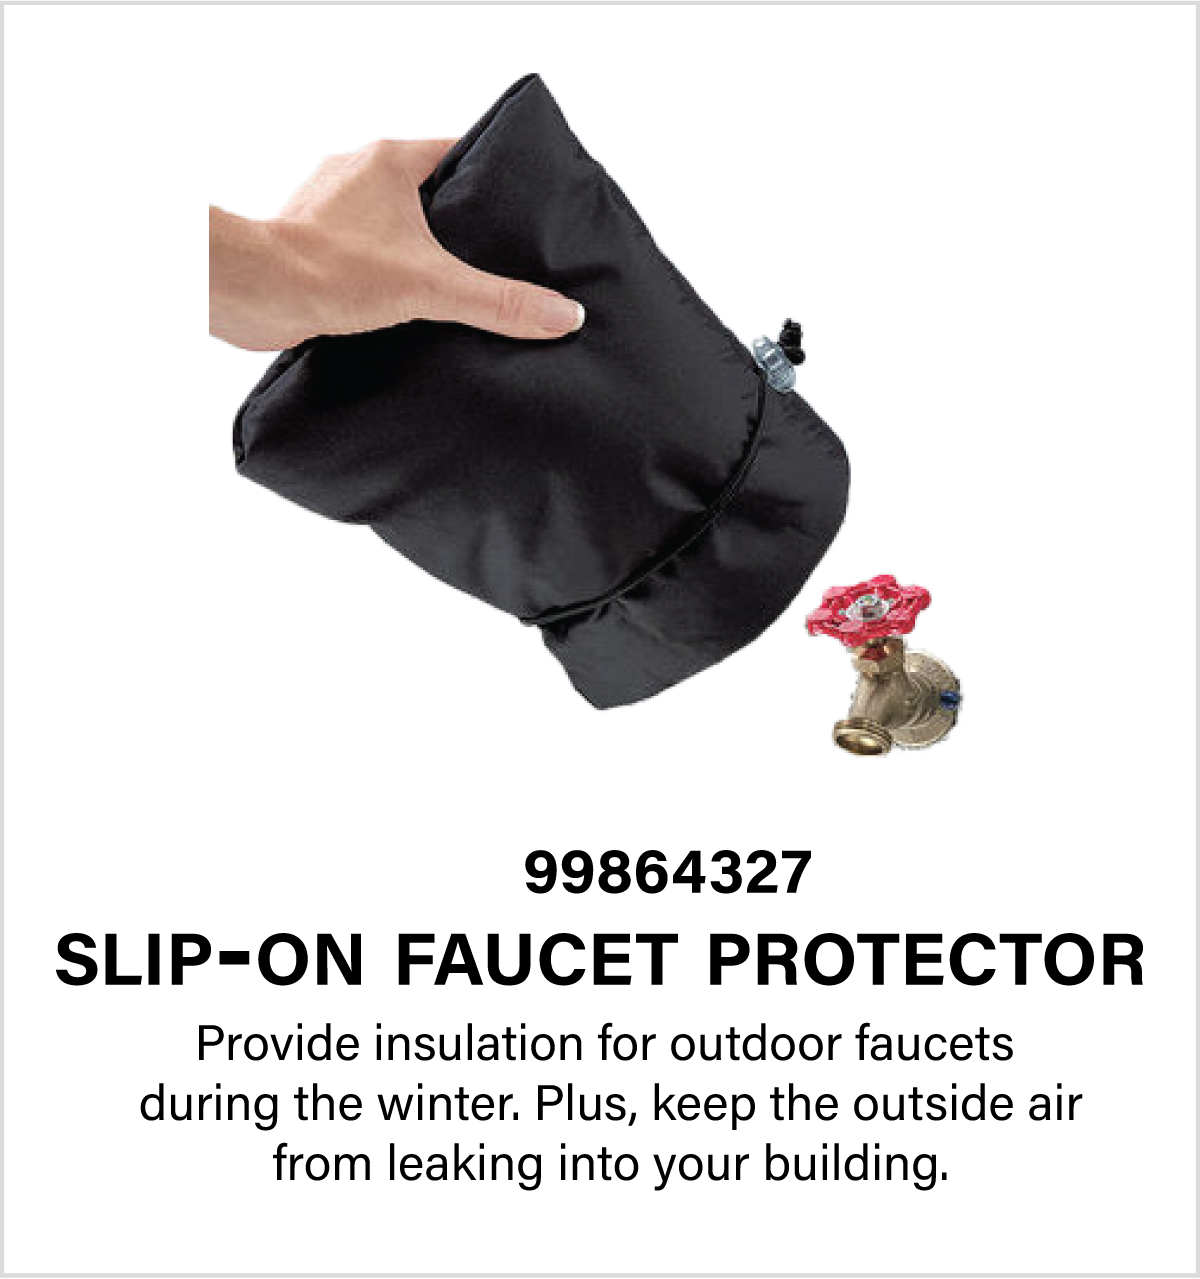 Winter Safety_Faucet Protectior